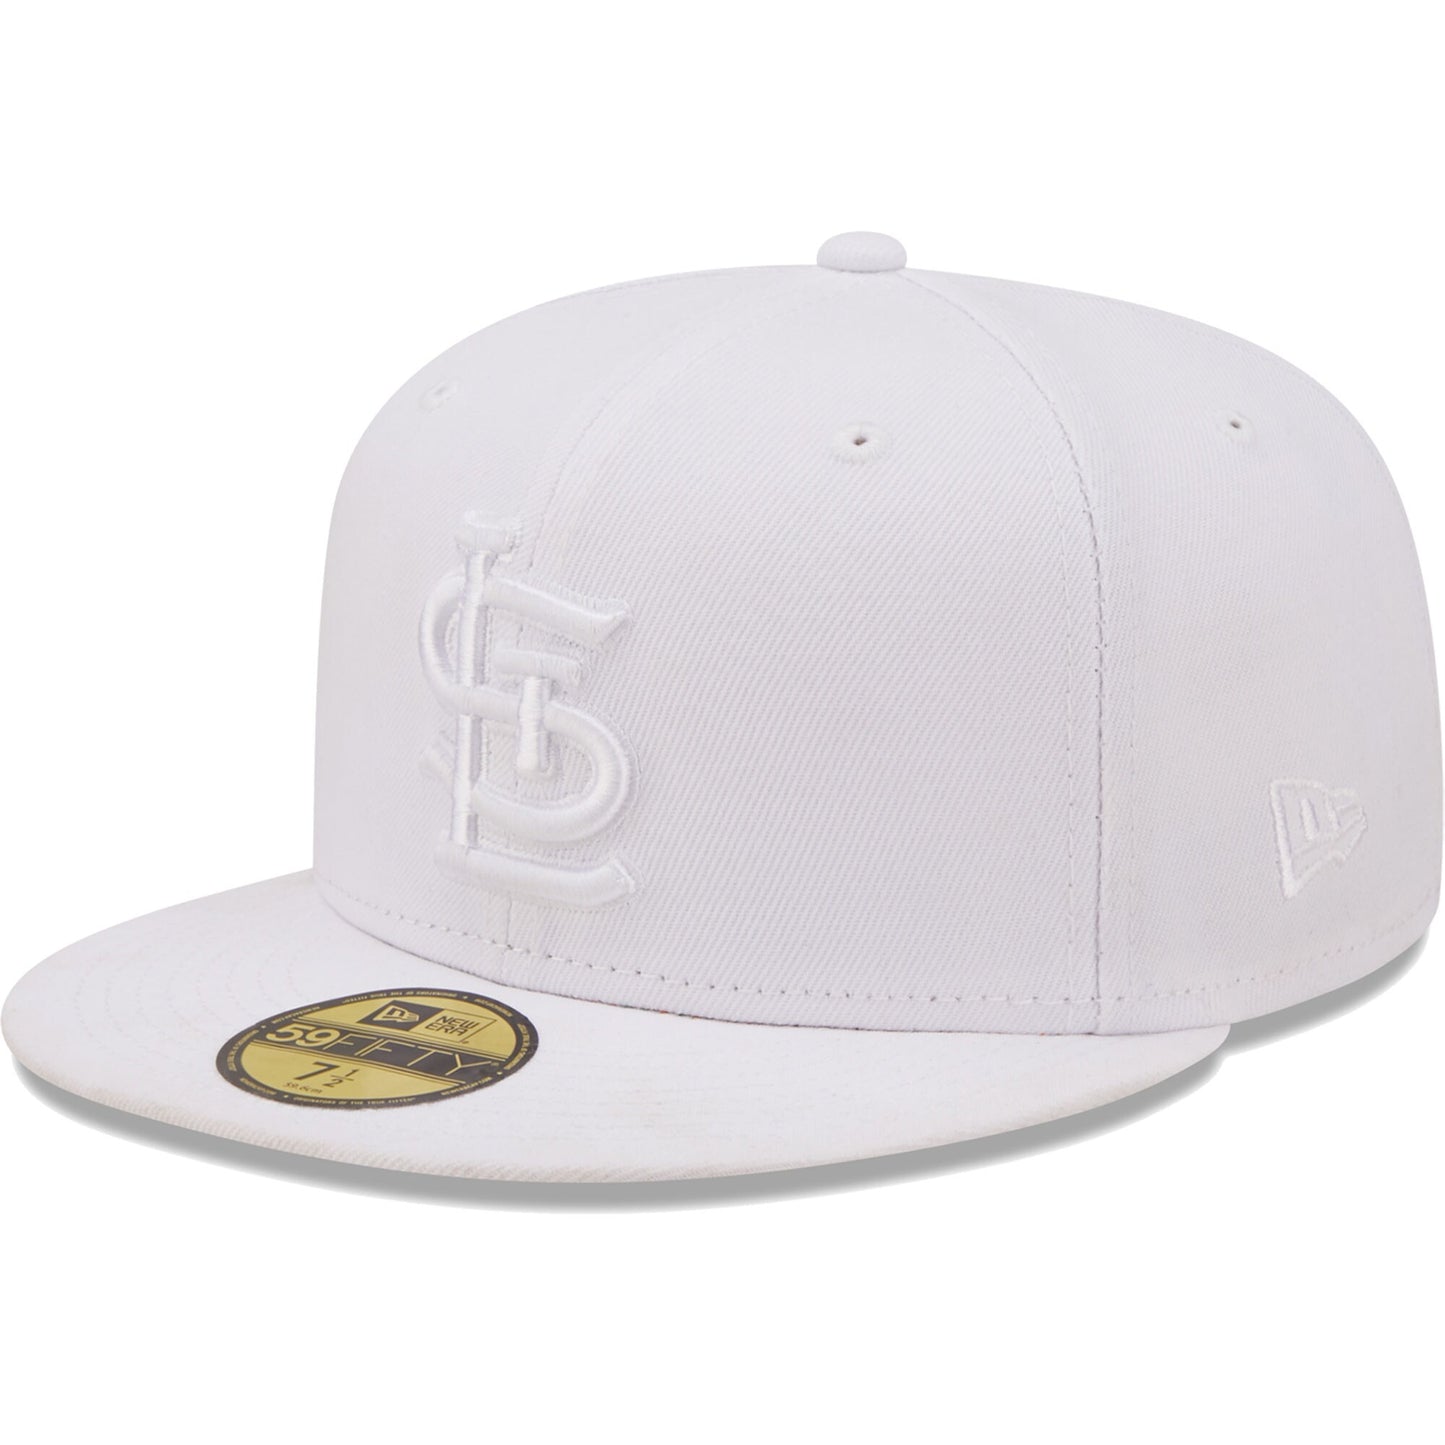 St. Louis Cardinals New Era White on White Logo 59FIFTY Fitted Hat